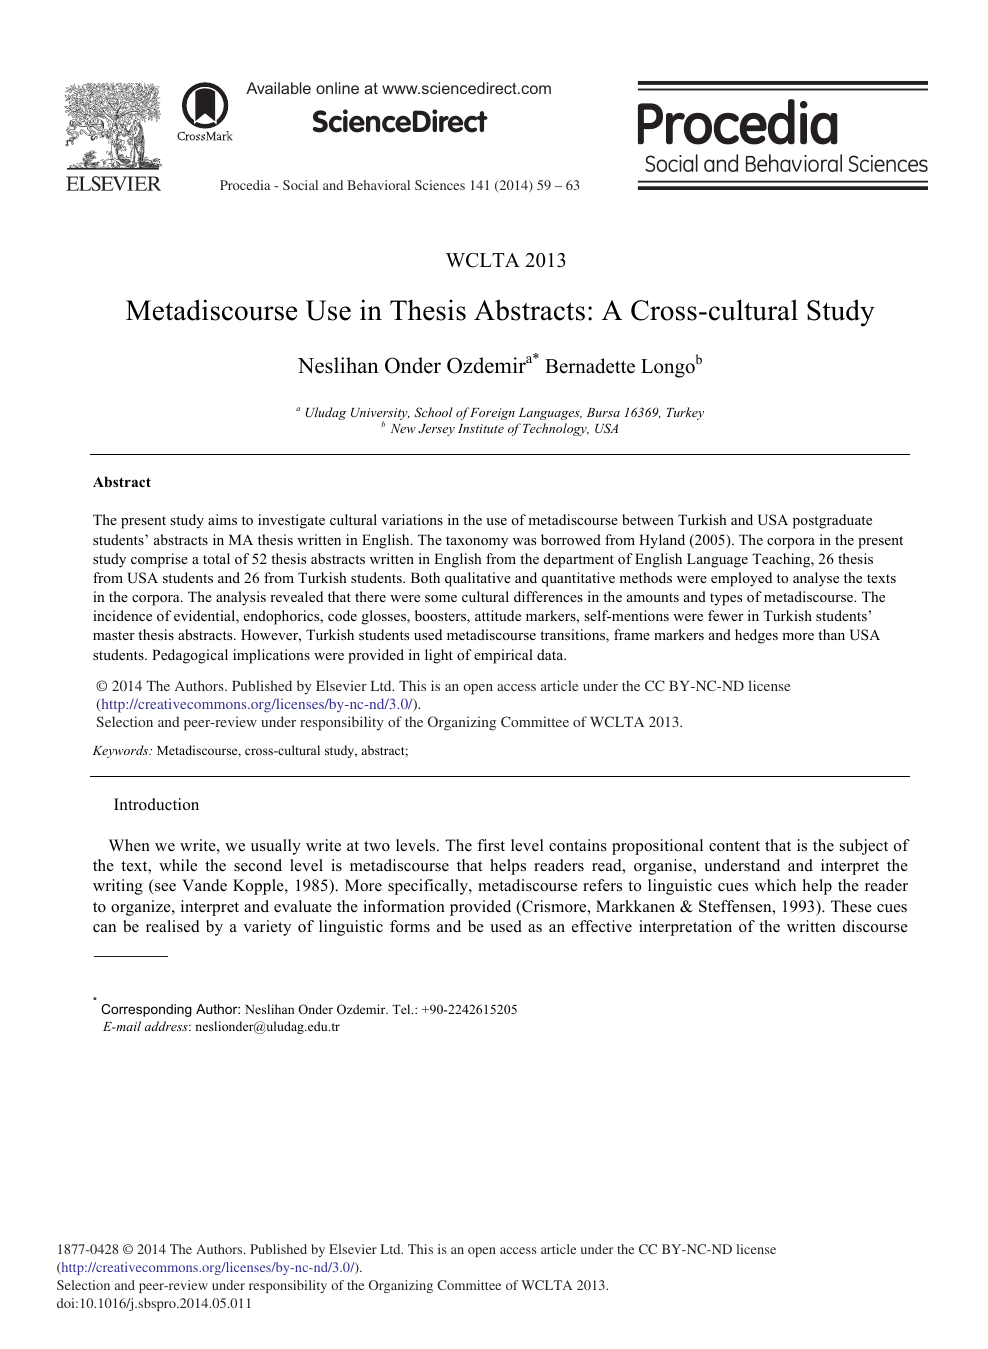 Metadiscourse Use In Thesis Abstracts A Cross Cultural Study Topic Of Research Paper In Educational Sciences Download Scholarly Article Pdf And Read For Free On Cyberleninka Open Science Hub